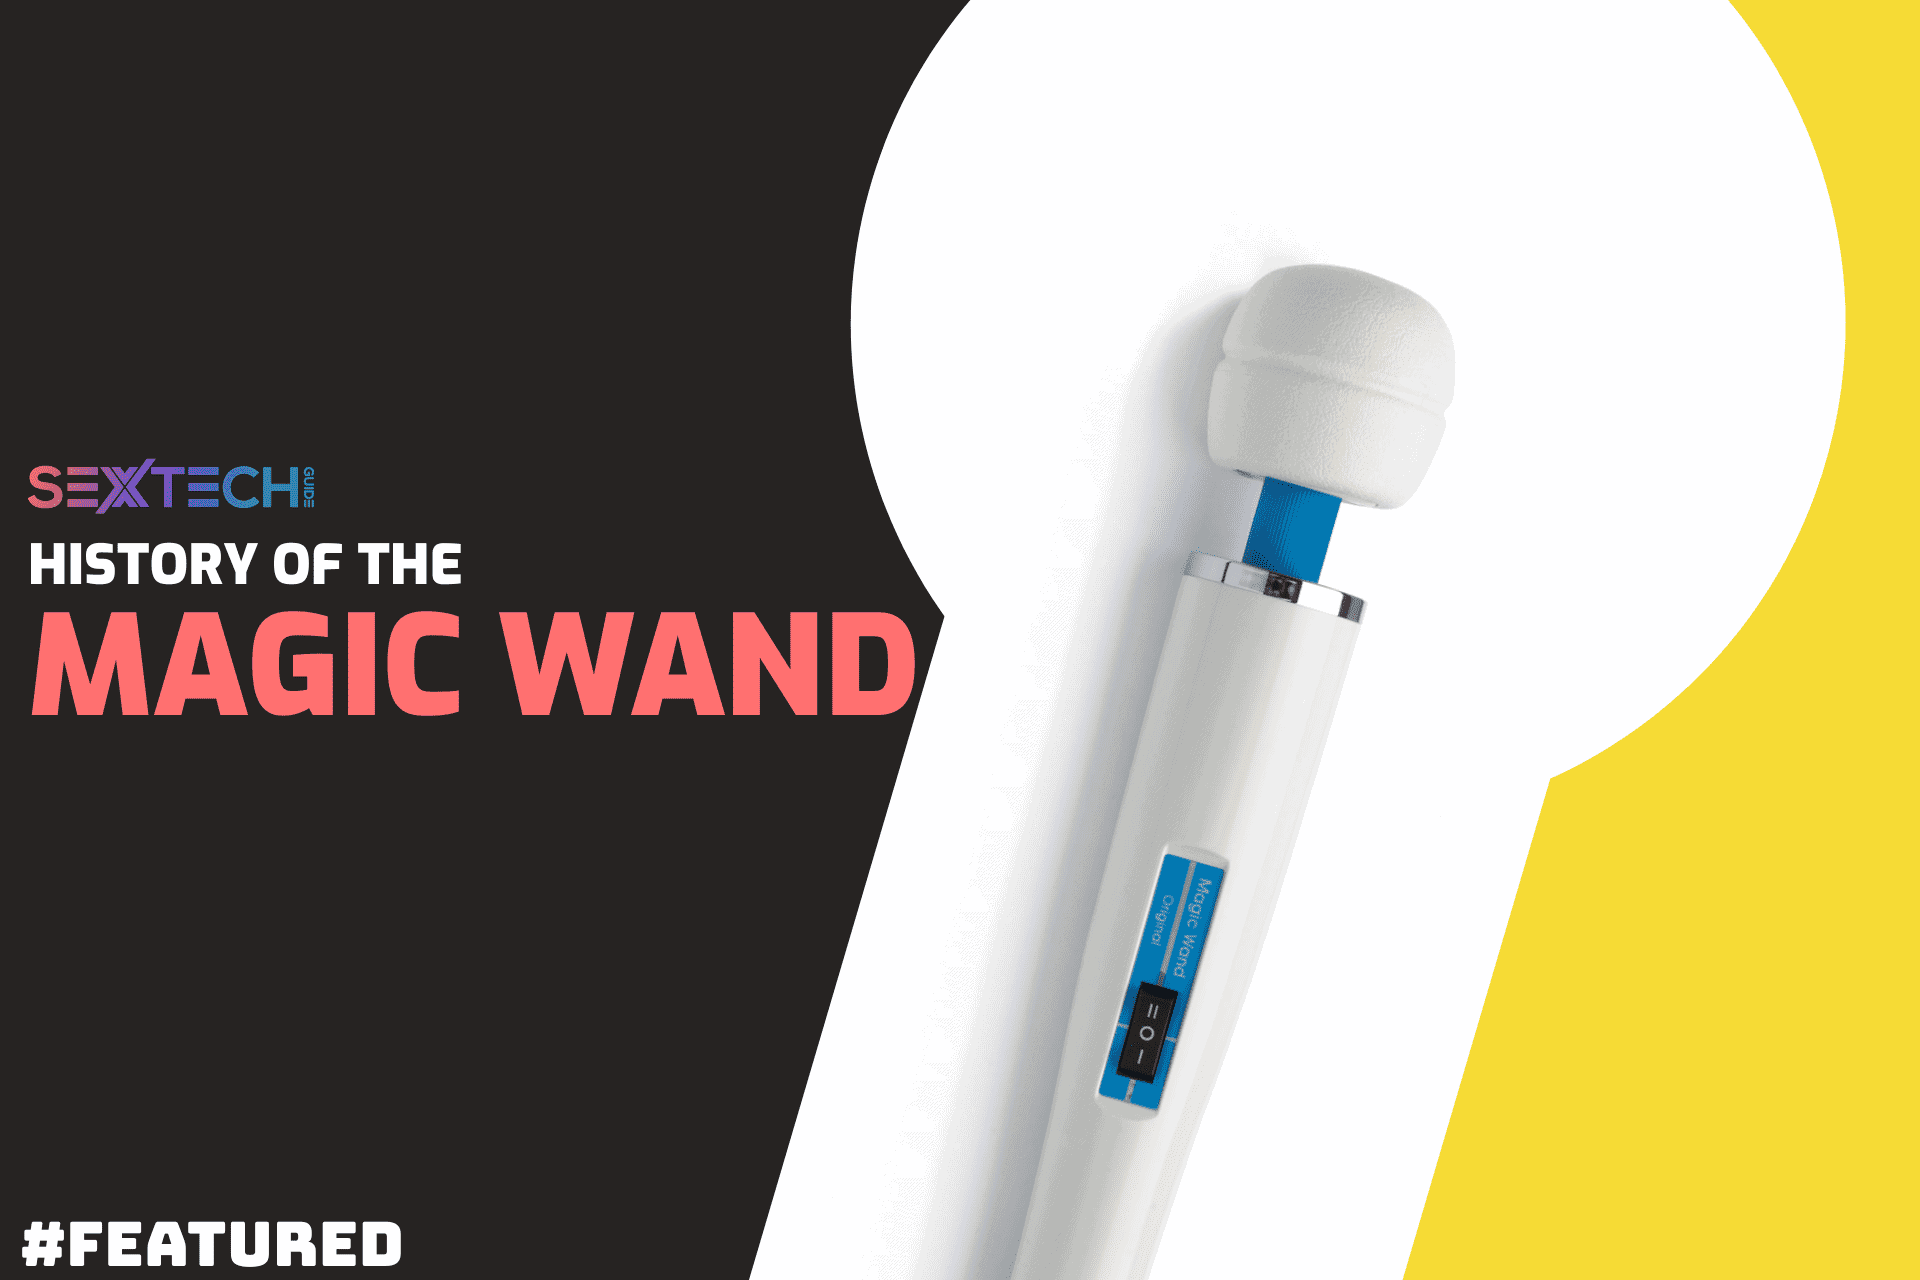 The Magic Wand: The history, culture, and tech behind one of the world’s most-loved vibrators